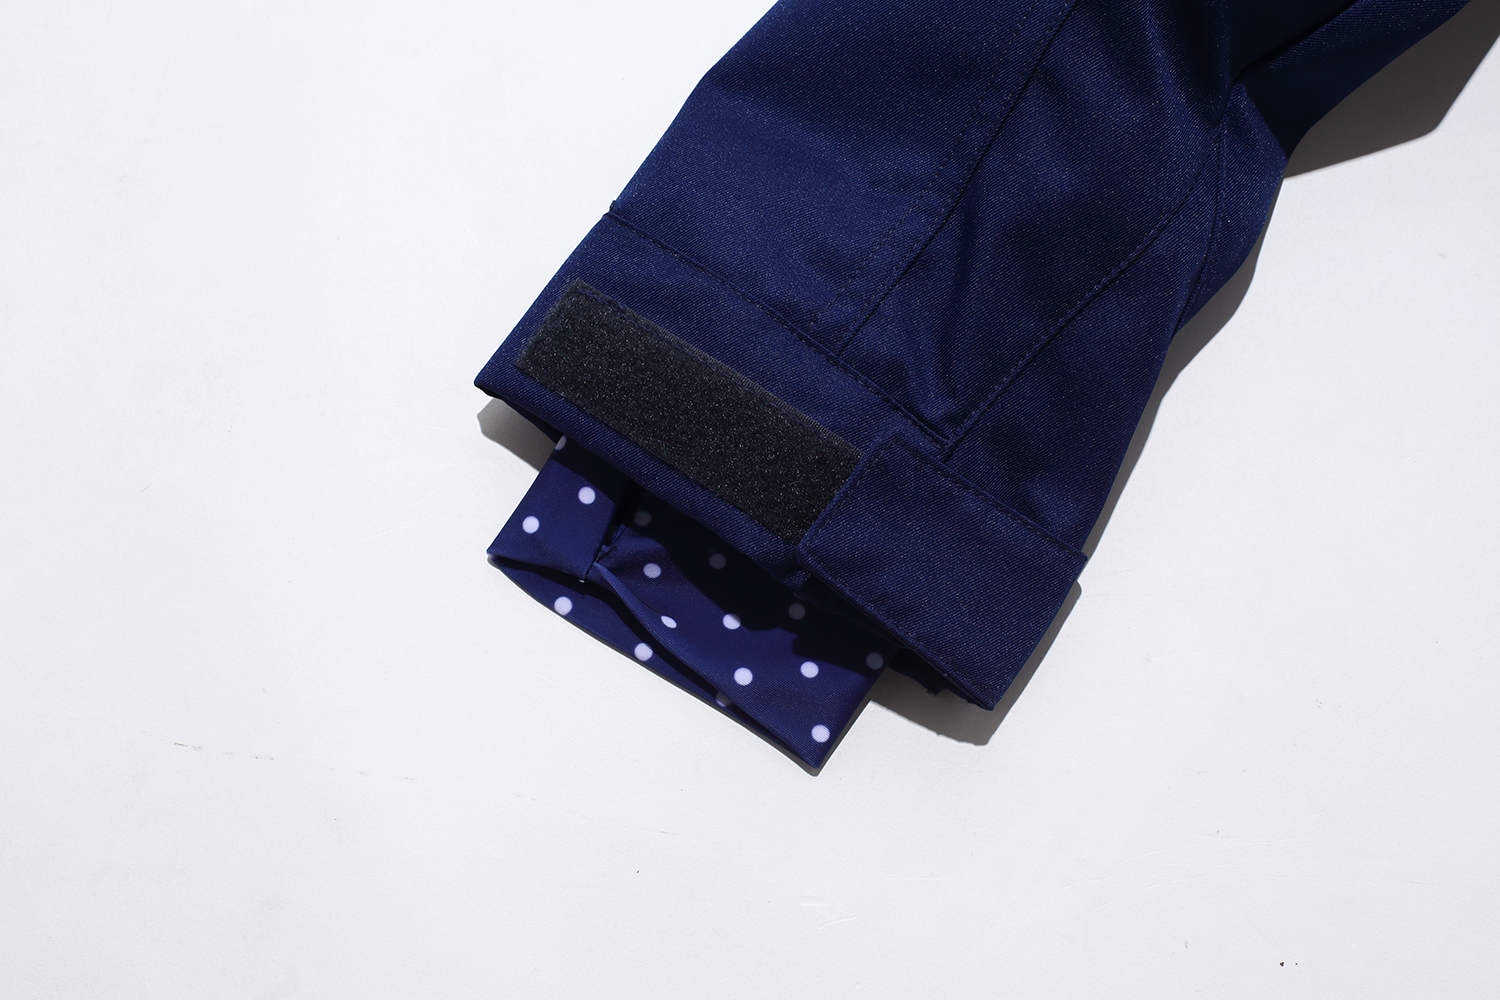 The inner cuff also adopts a dot pattern like a ladies' brand, making it an accent